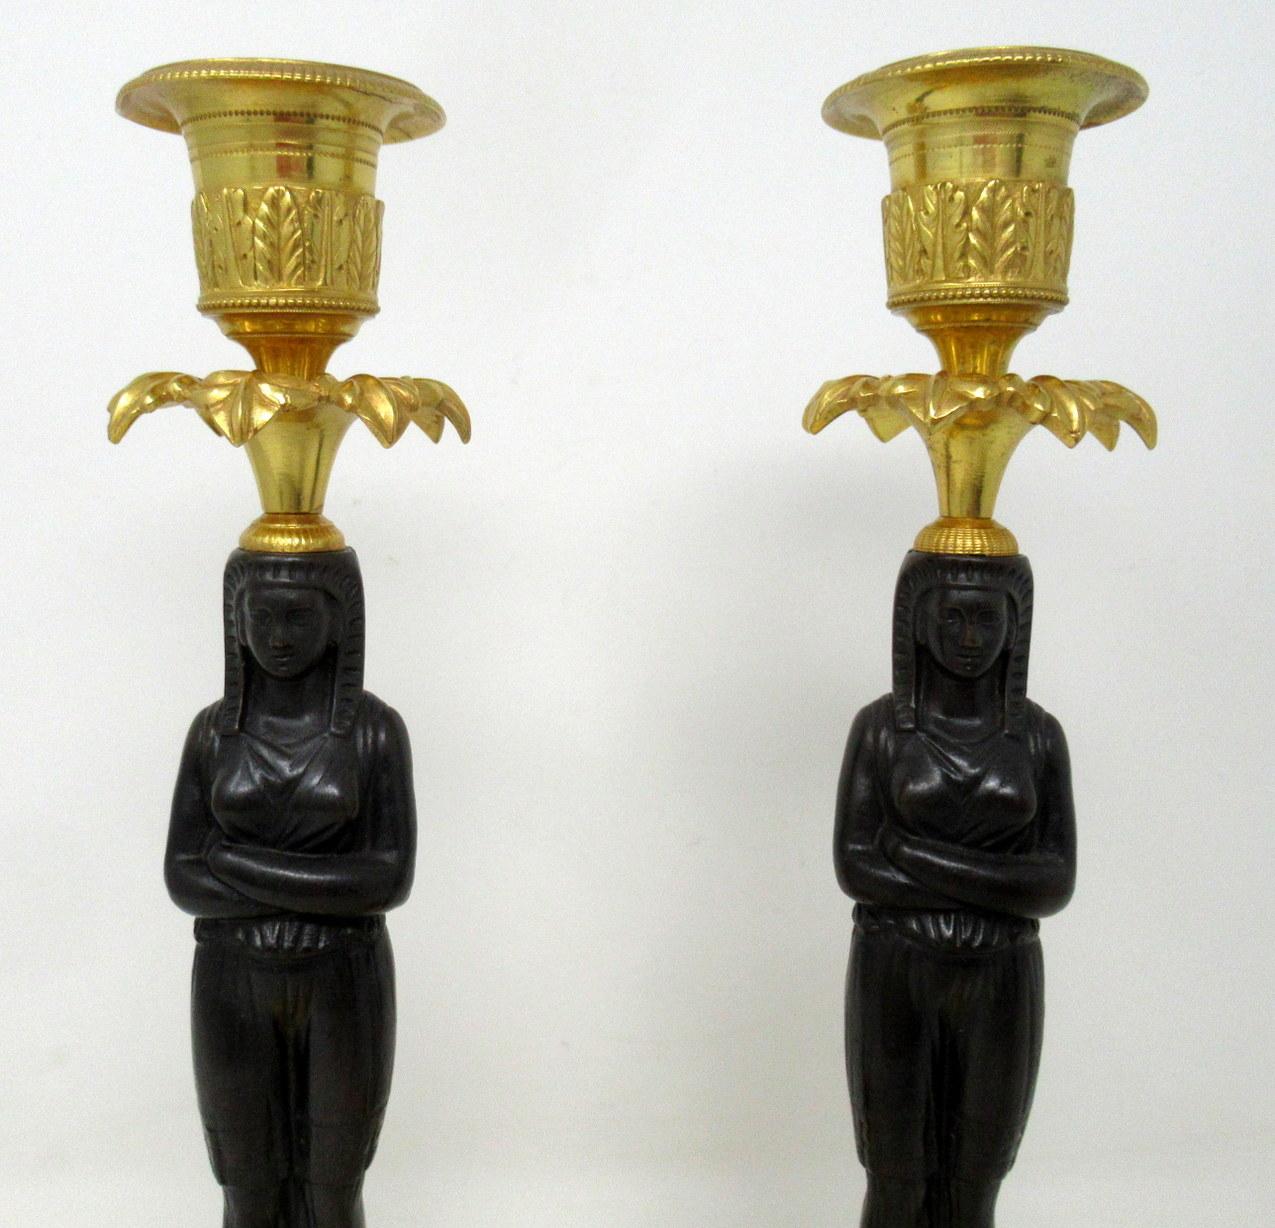 A fine pair of stylish and imposing French ormolu and patinated bronze single light Empire style candlesticks modelled to depict two identical full-length Egyptian female figures in traditional attire of outstanding quality, mid to late 19th